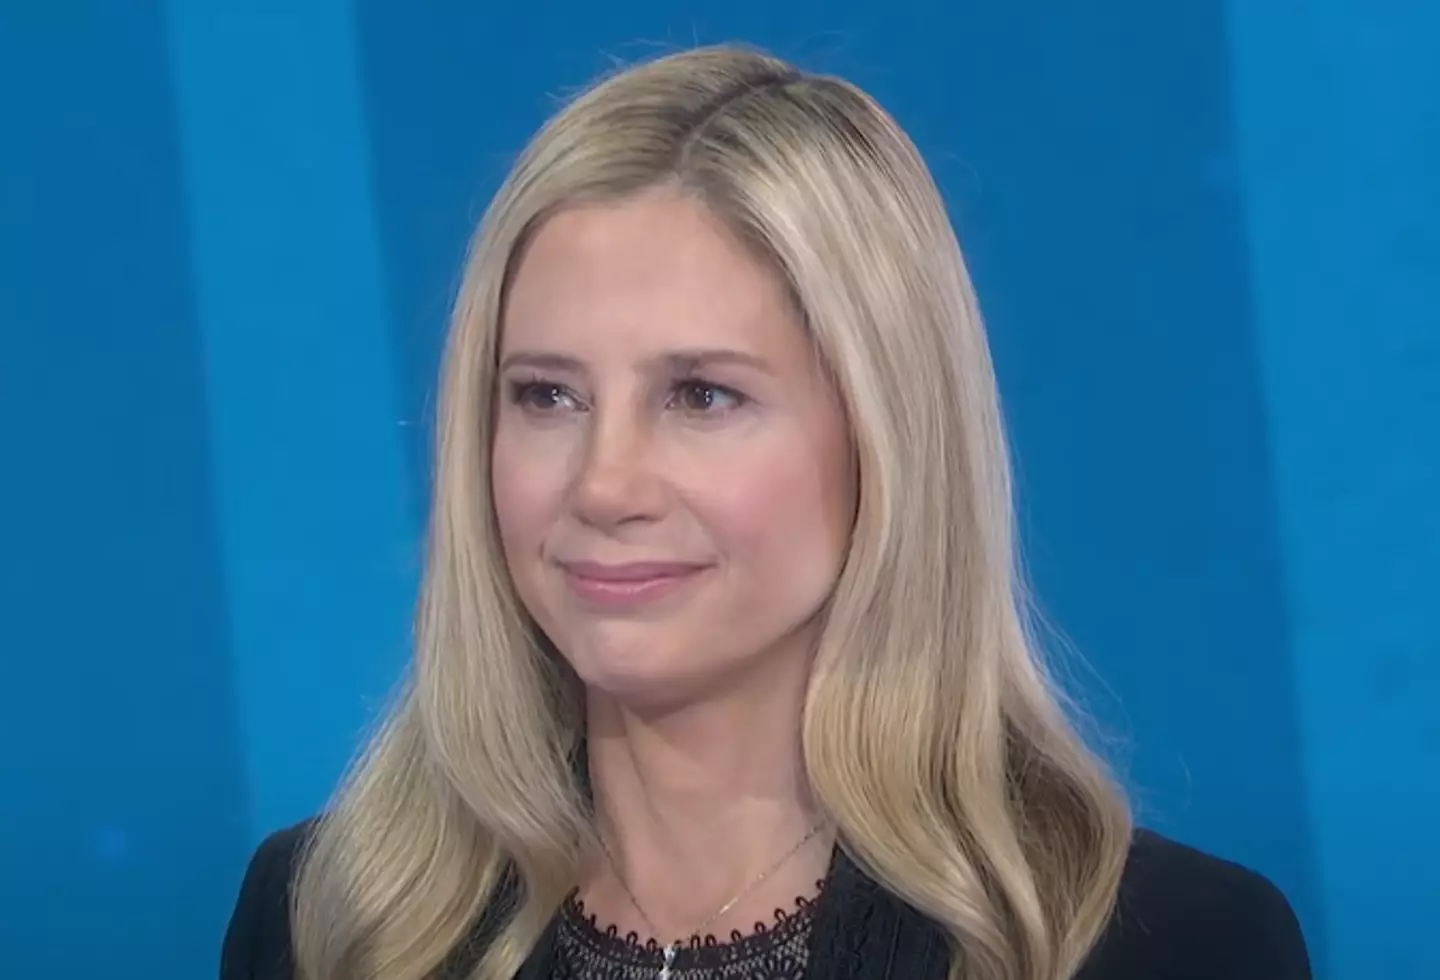 Mira Sorvino called out the Academy for leaving her father out of the tribute.